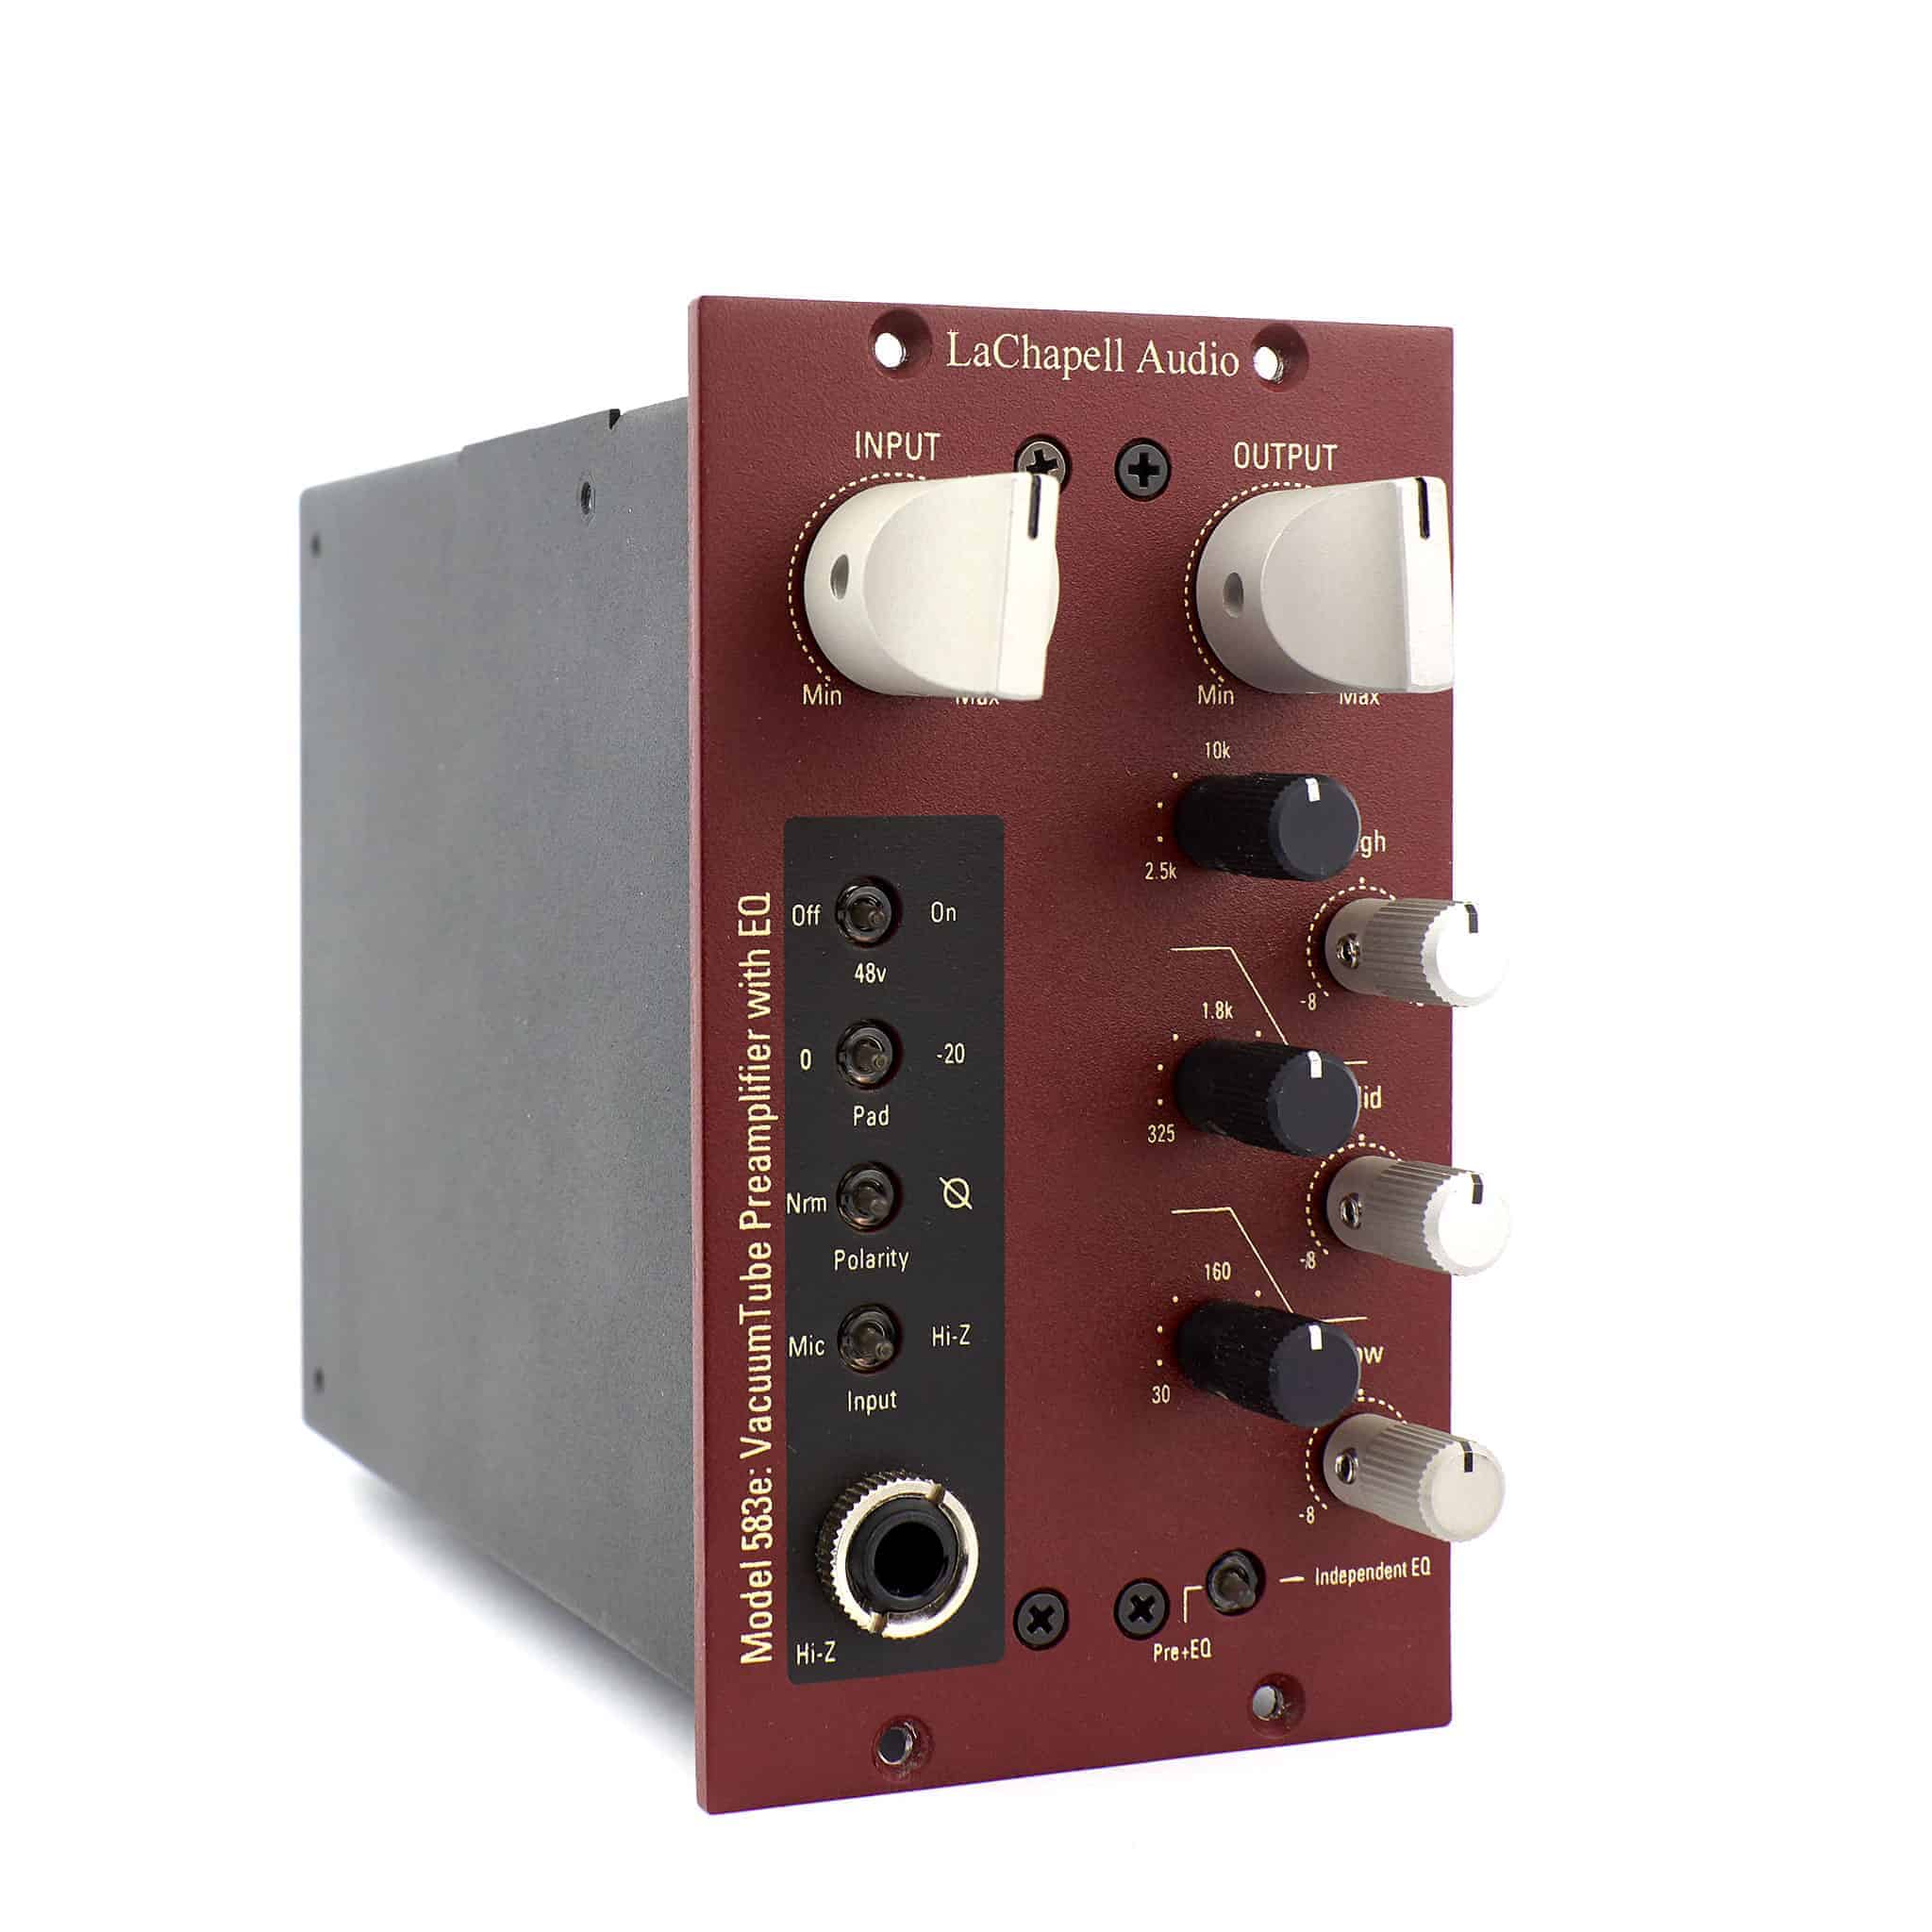 LaChapell Audio 583e 500 series tube preamp with integrated EQ angle image